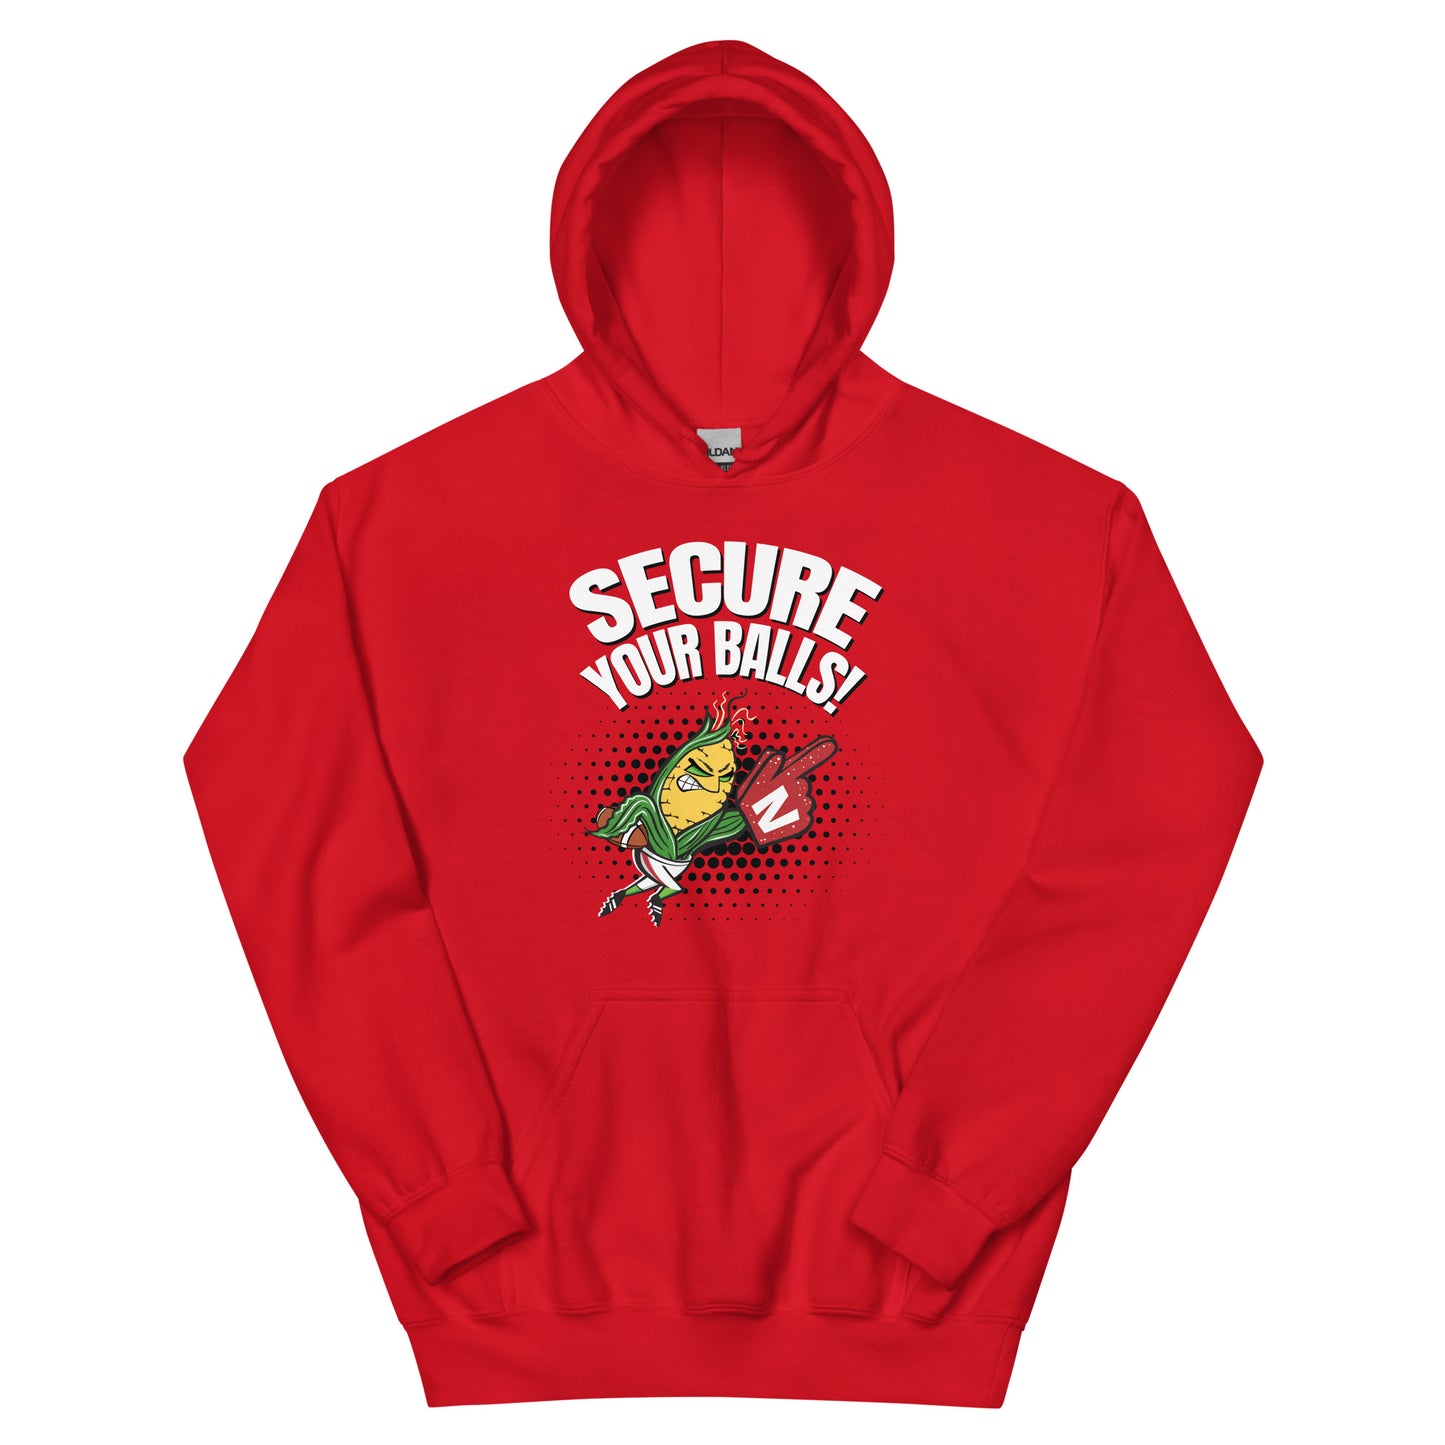 Secure Your Balls! - Unisex Hoodie